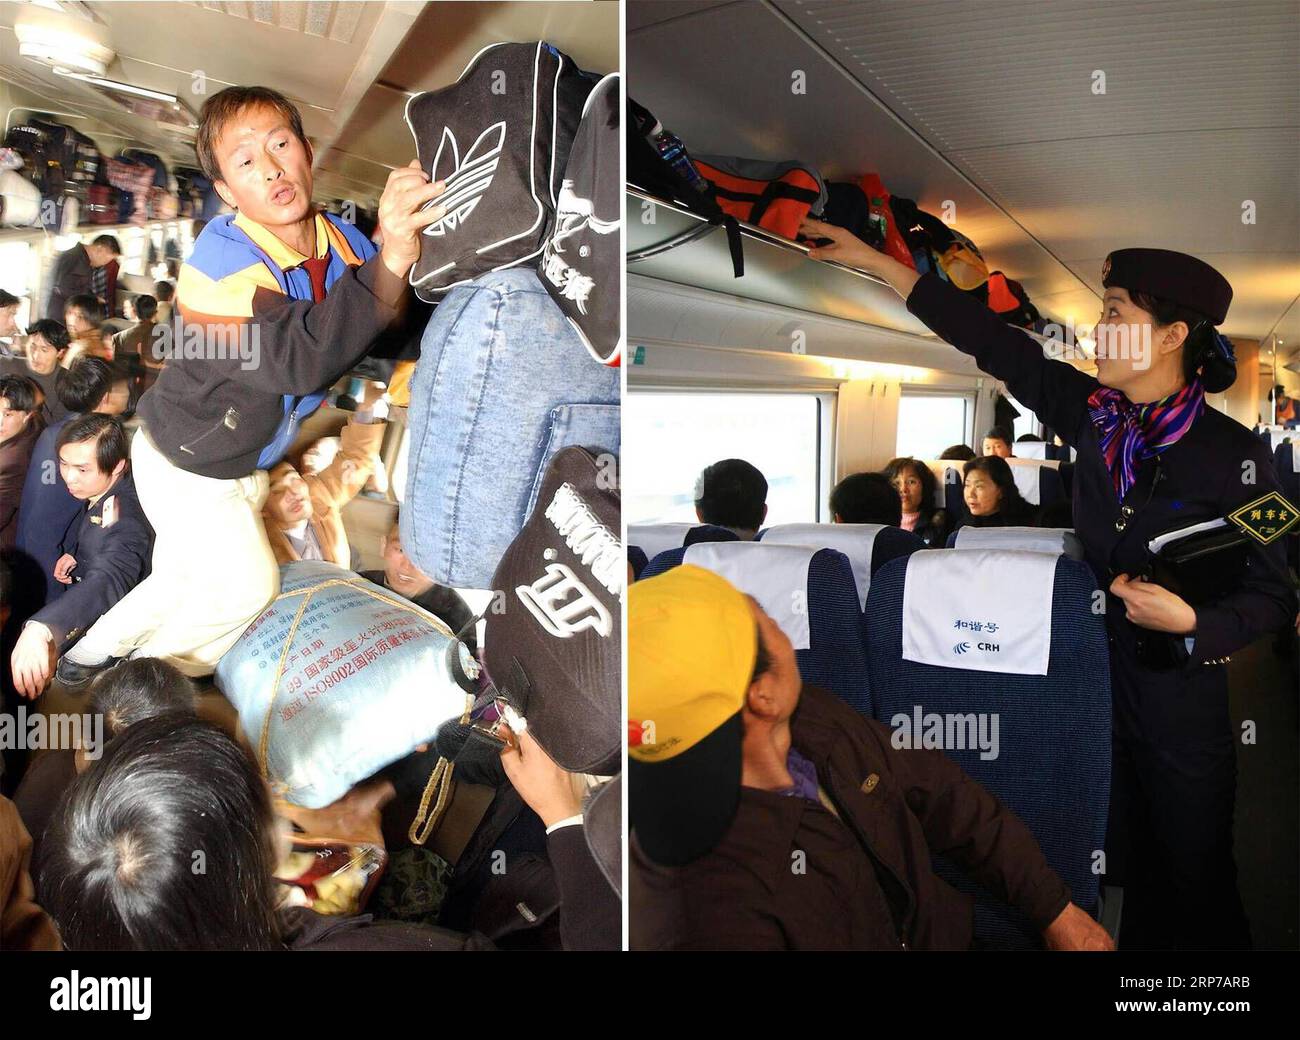 (190202) -- BEIJING, Feb. 2, 2019 () -- This combo photo shows passengers arranging their luggage in carriage 11 of the train L28 which travels from Fuzhou in southeast China s Fujian Province to southwest China s Chongqing Municipality, Jan. 23, 2003 (left, photo taken by Jiang Kehong); and train conductor Jiang Fei checking the luggage rack aboard a bullet train on the Wuhan-Guangzhou high-speed railway, Jan. 30, 2010 (right, photo taken by Li Mingfang). China is experiencing its annual special 40 days or Spring Festival travel rush, which is dubbed as the largest migration on the planet, wi Stock Photo